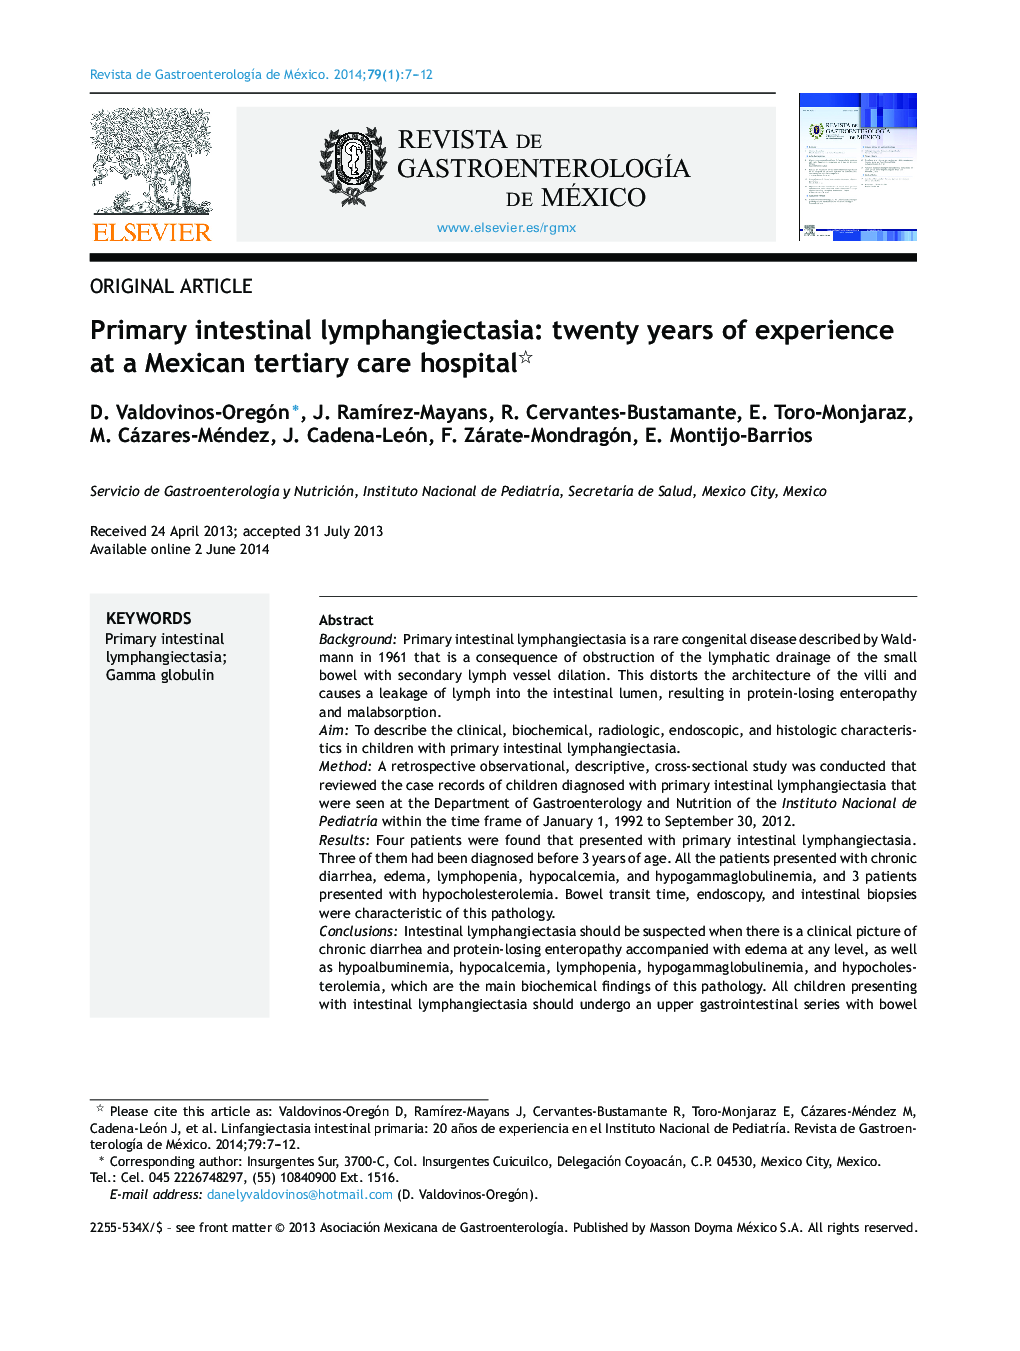 Primary intestinal lymphangiectasia: twenty years of experience at a Mexican tertiary care hospital 